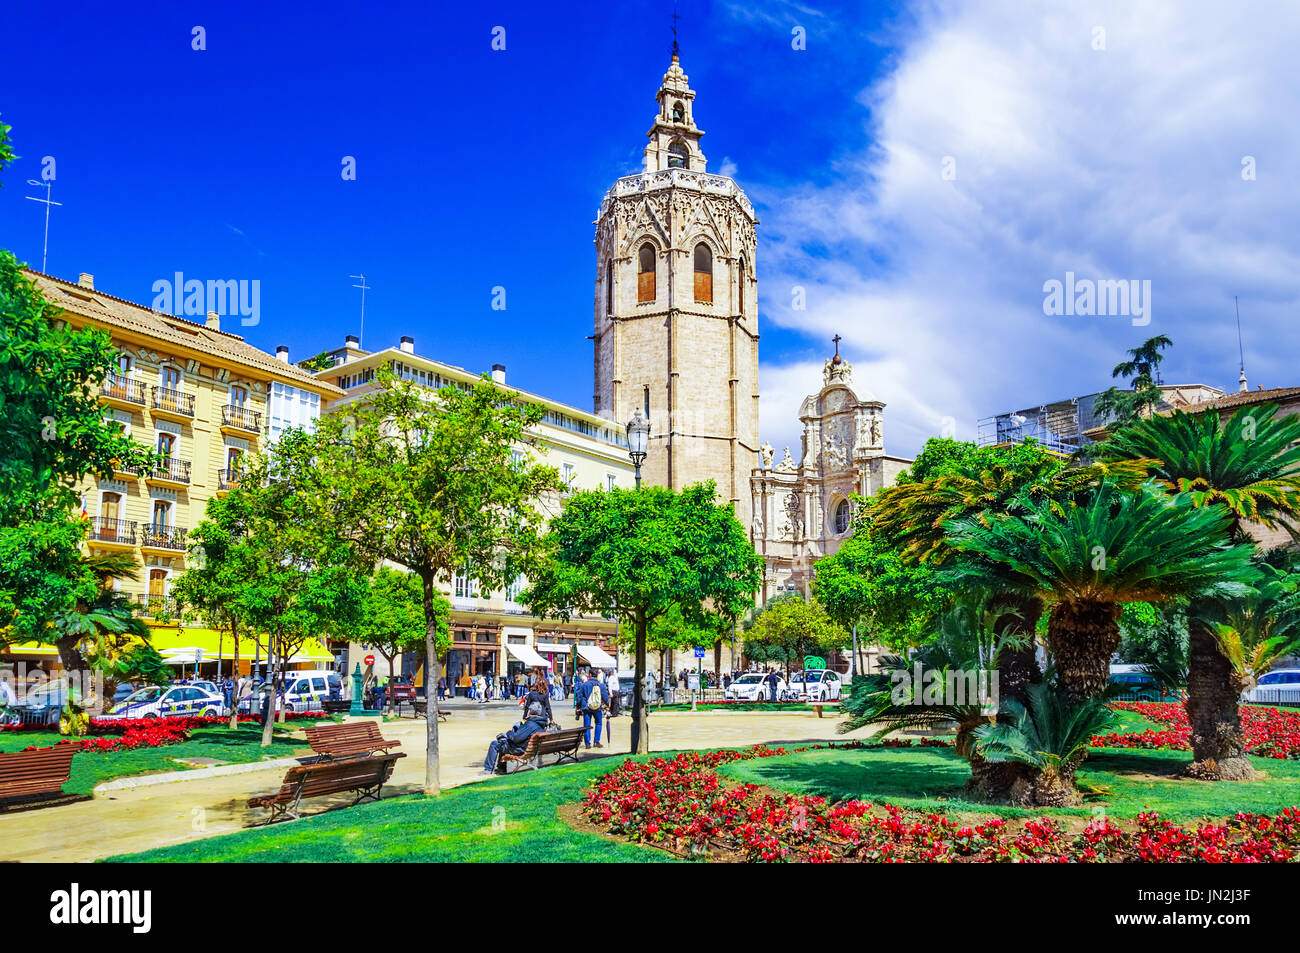 Micalet tower, Miguelete tower in Plaza de la Reina, Valencia, Spain, Europe Stock Photo